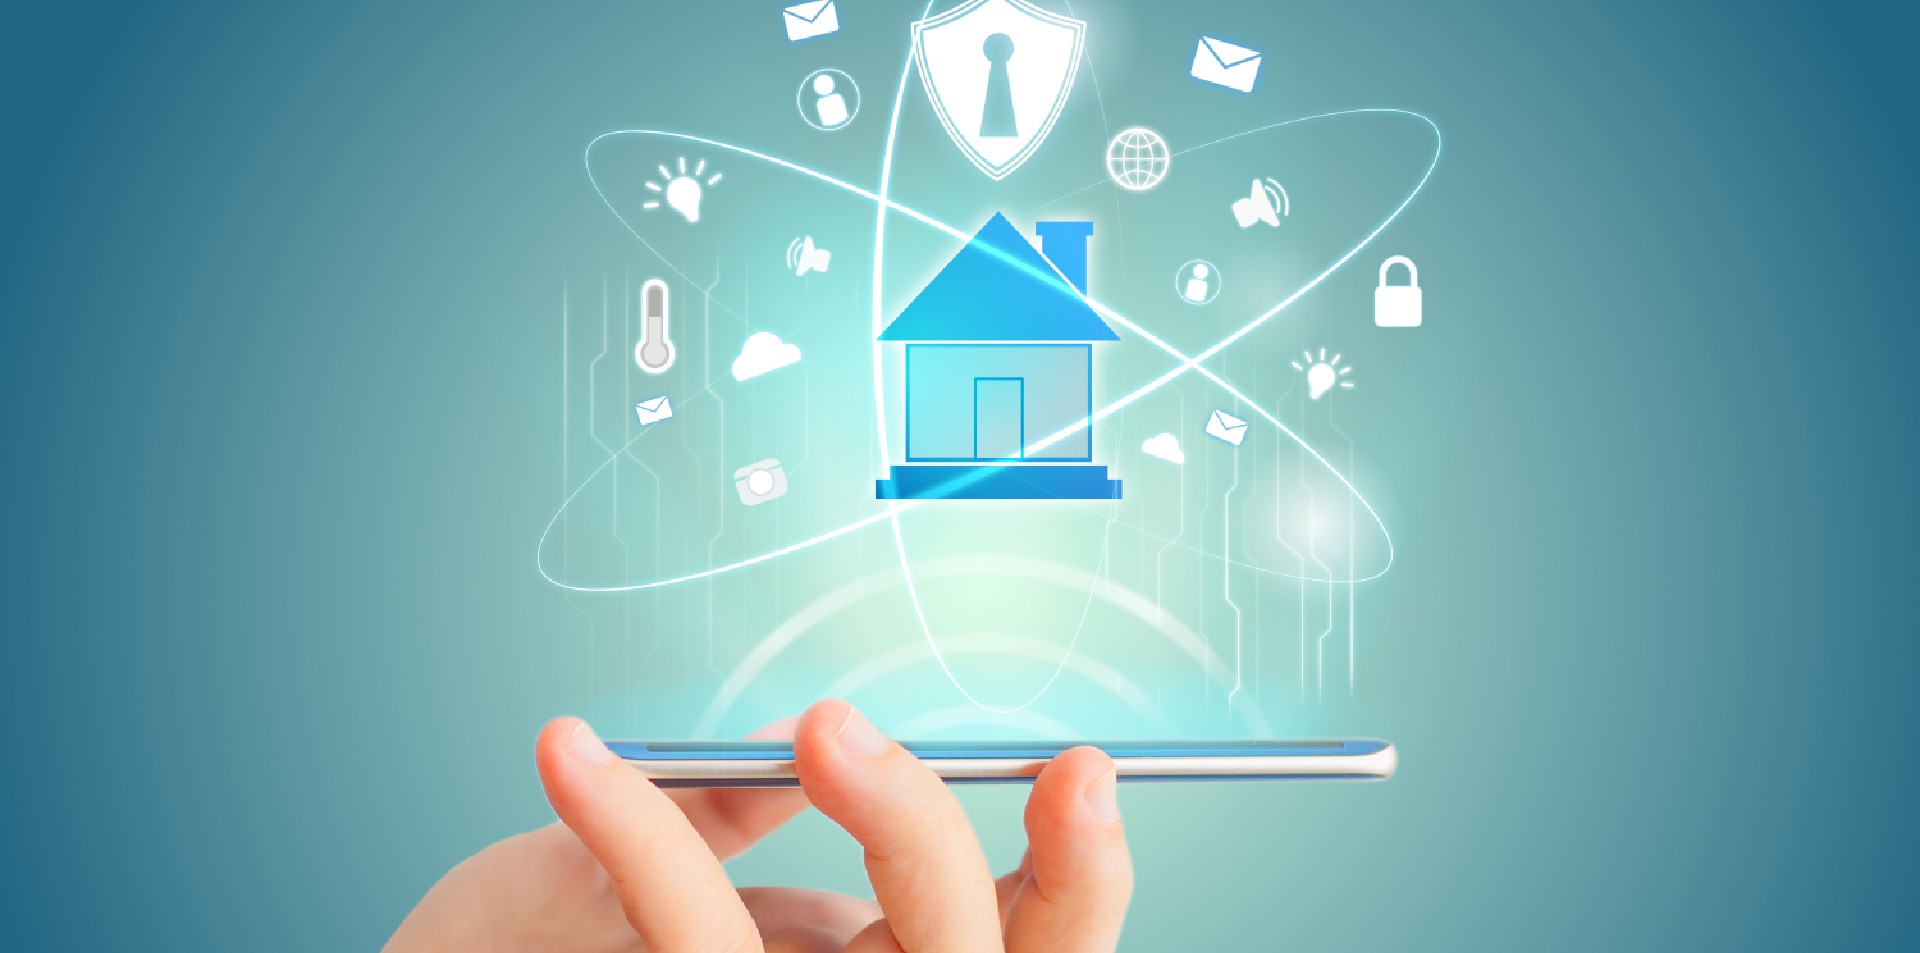 New Generation of Wi-Fi to Make Your Home Smart